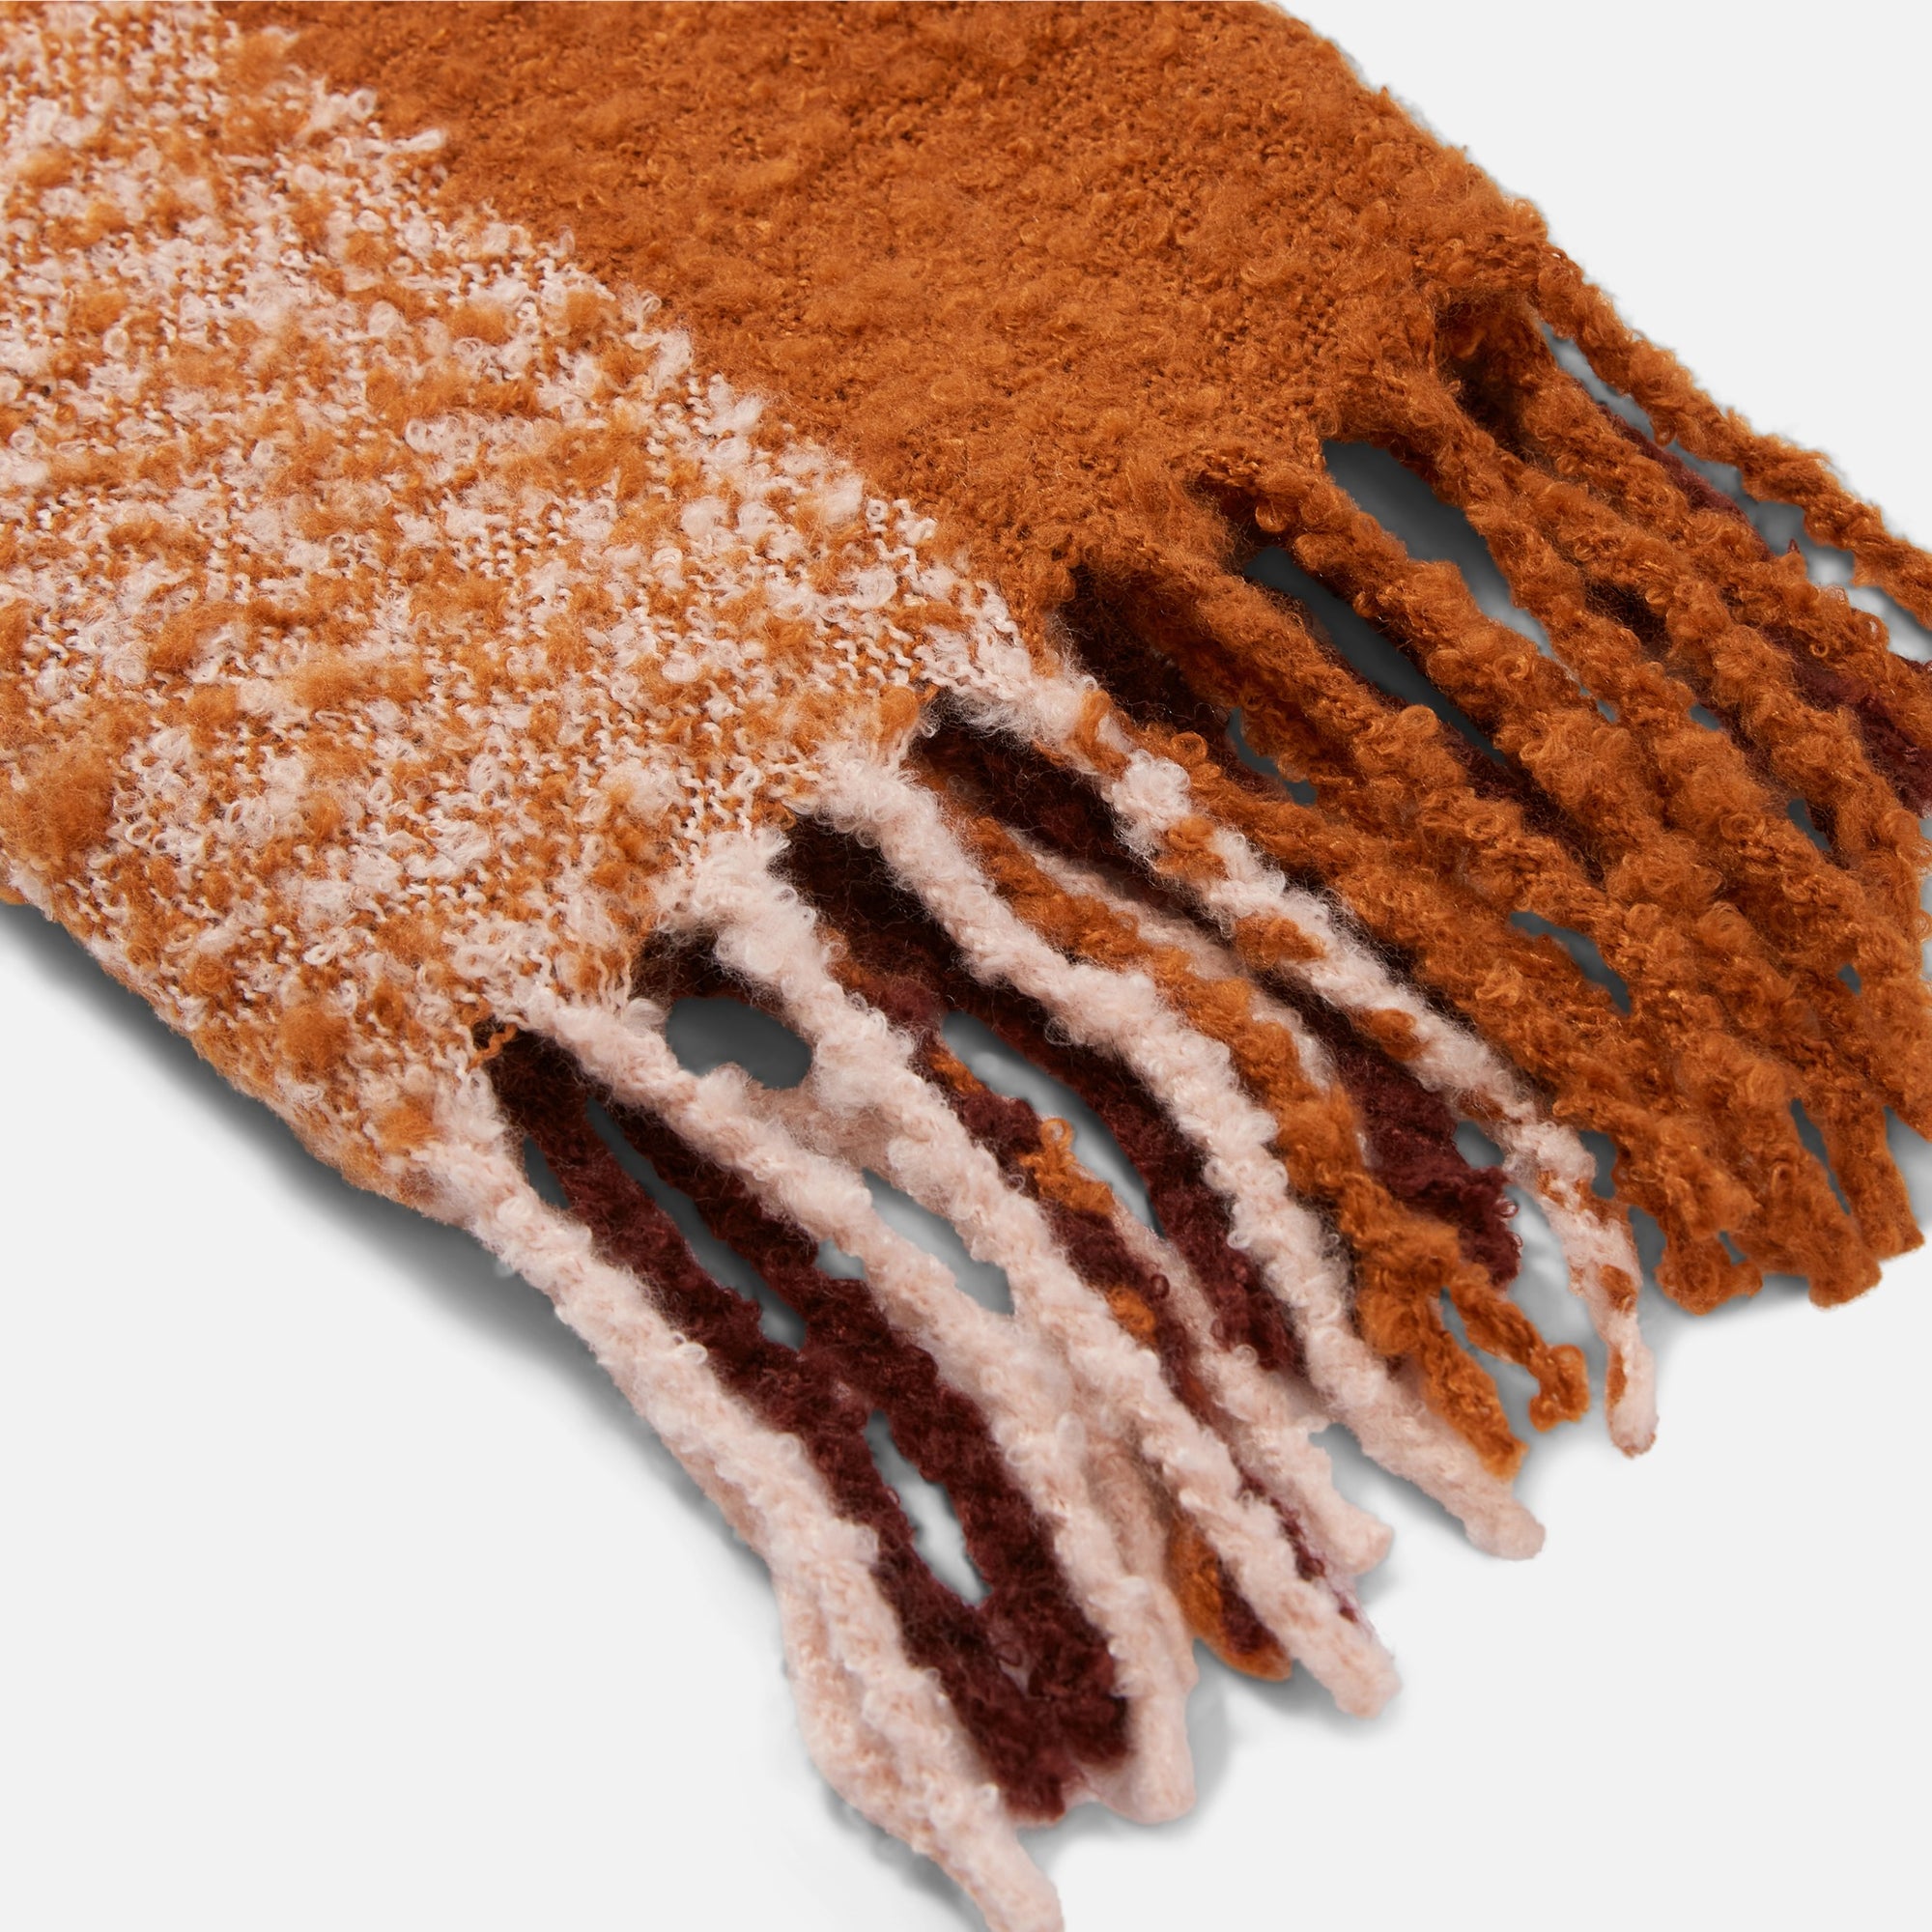 Cozy pink and rust checkered scarf with terry fringe finish